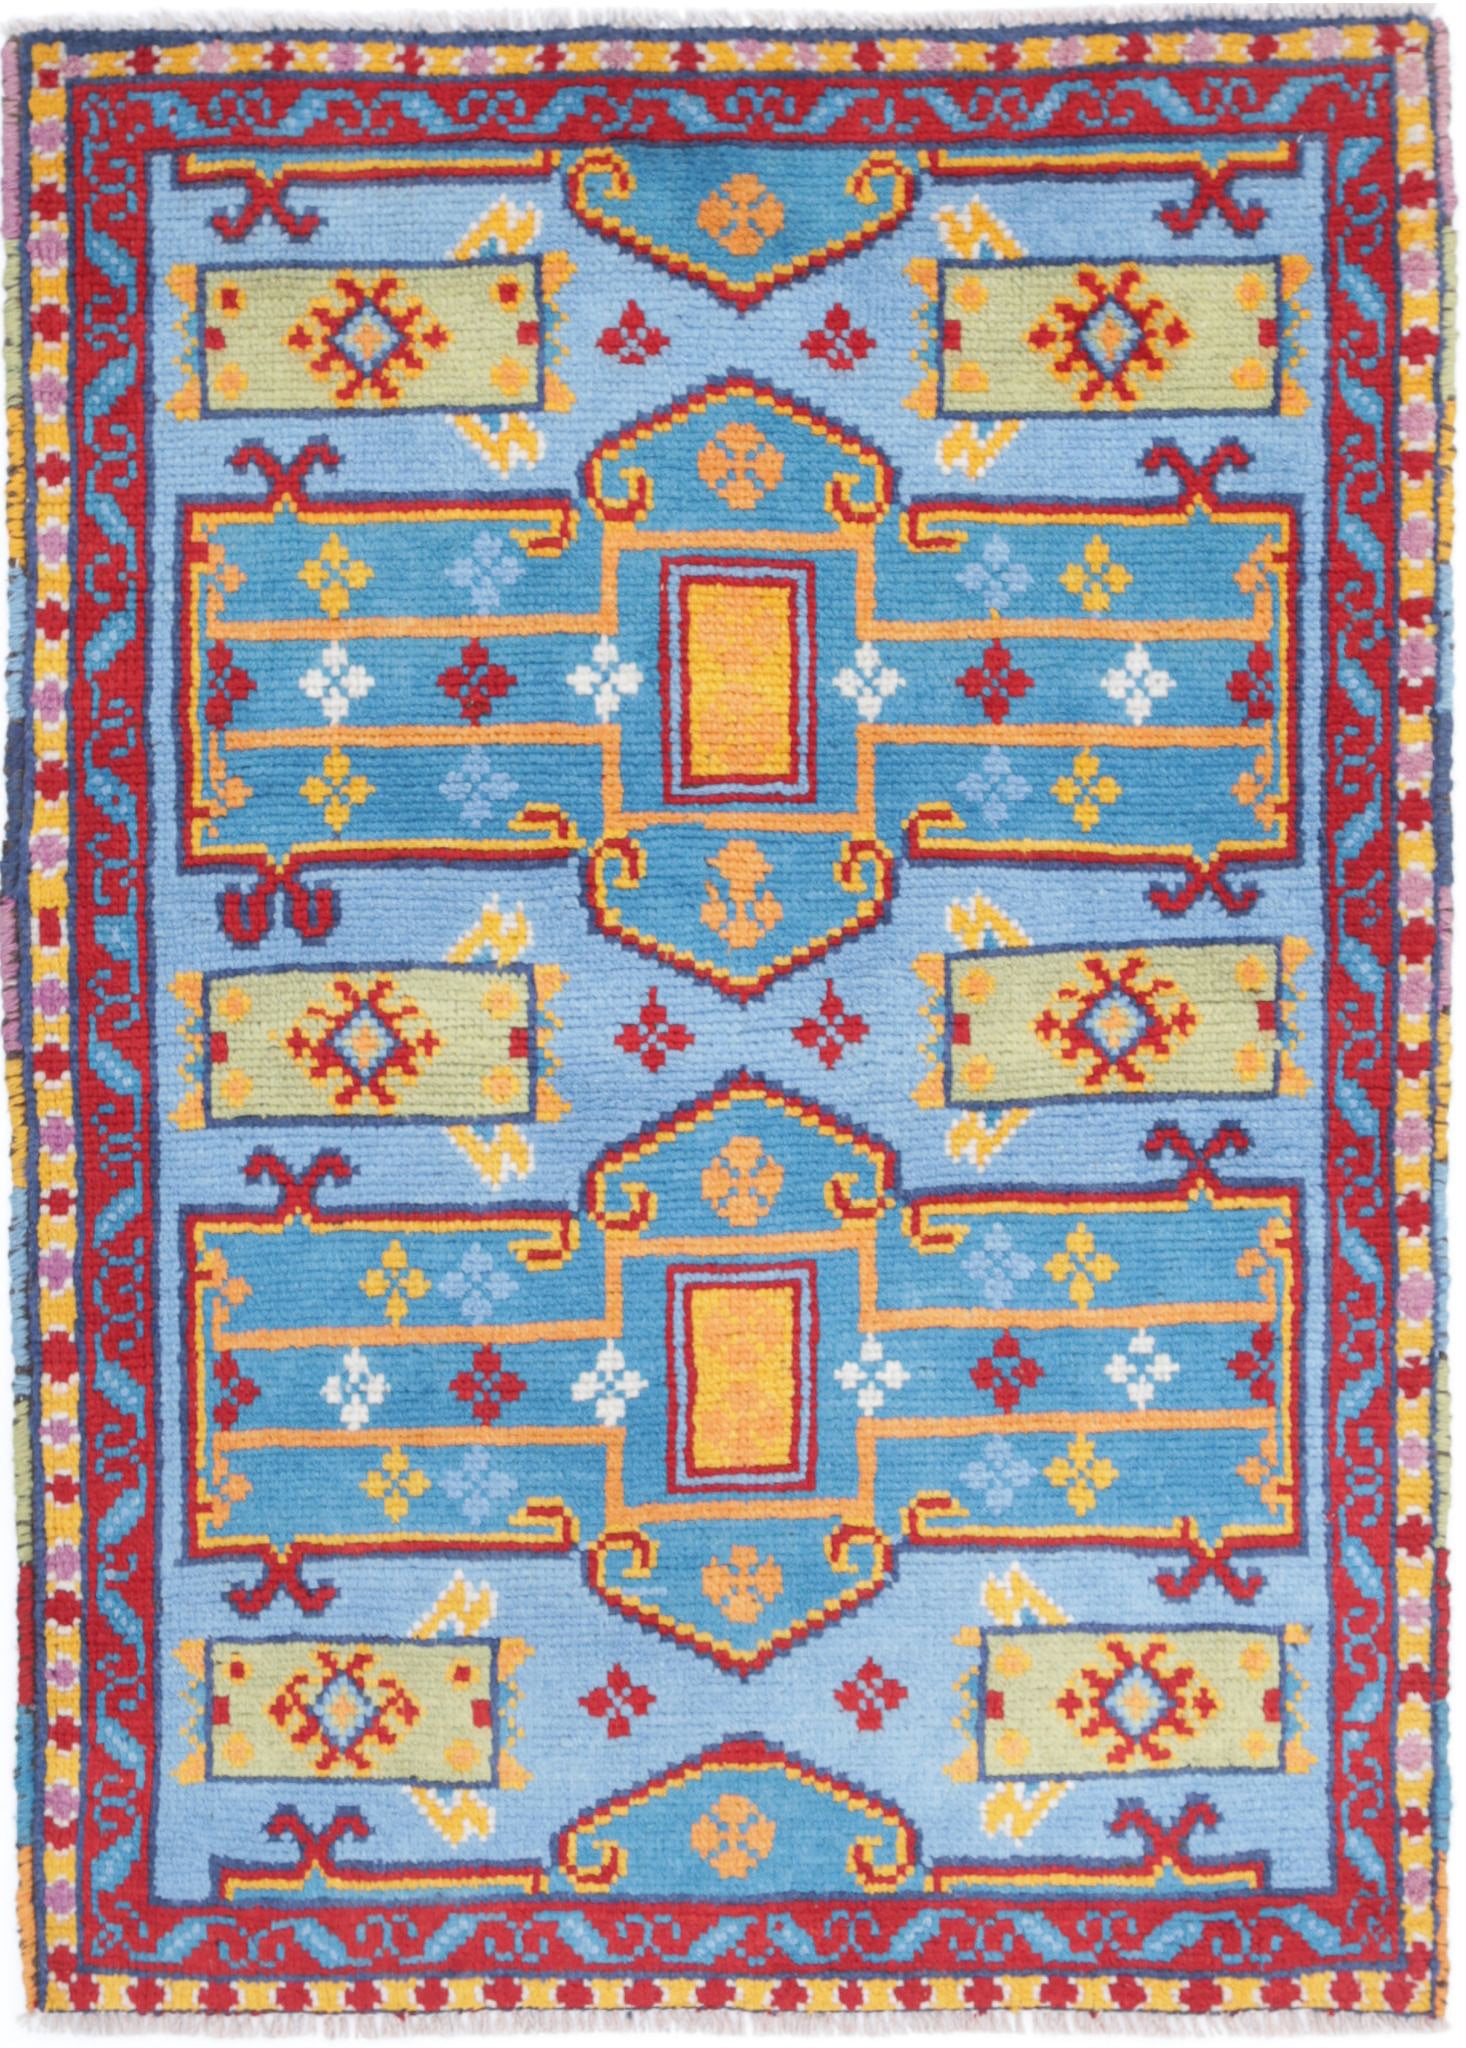 Revival-hand-knotted-qarghani-wool-rug-5014019.jpg